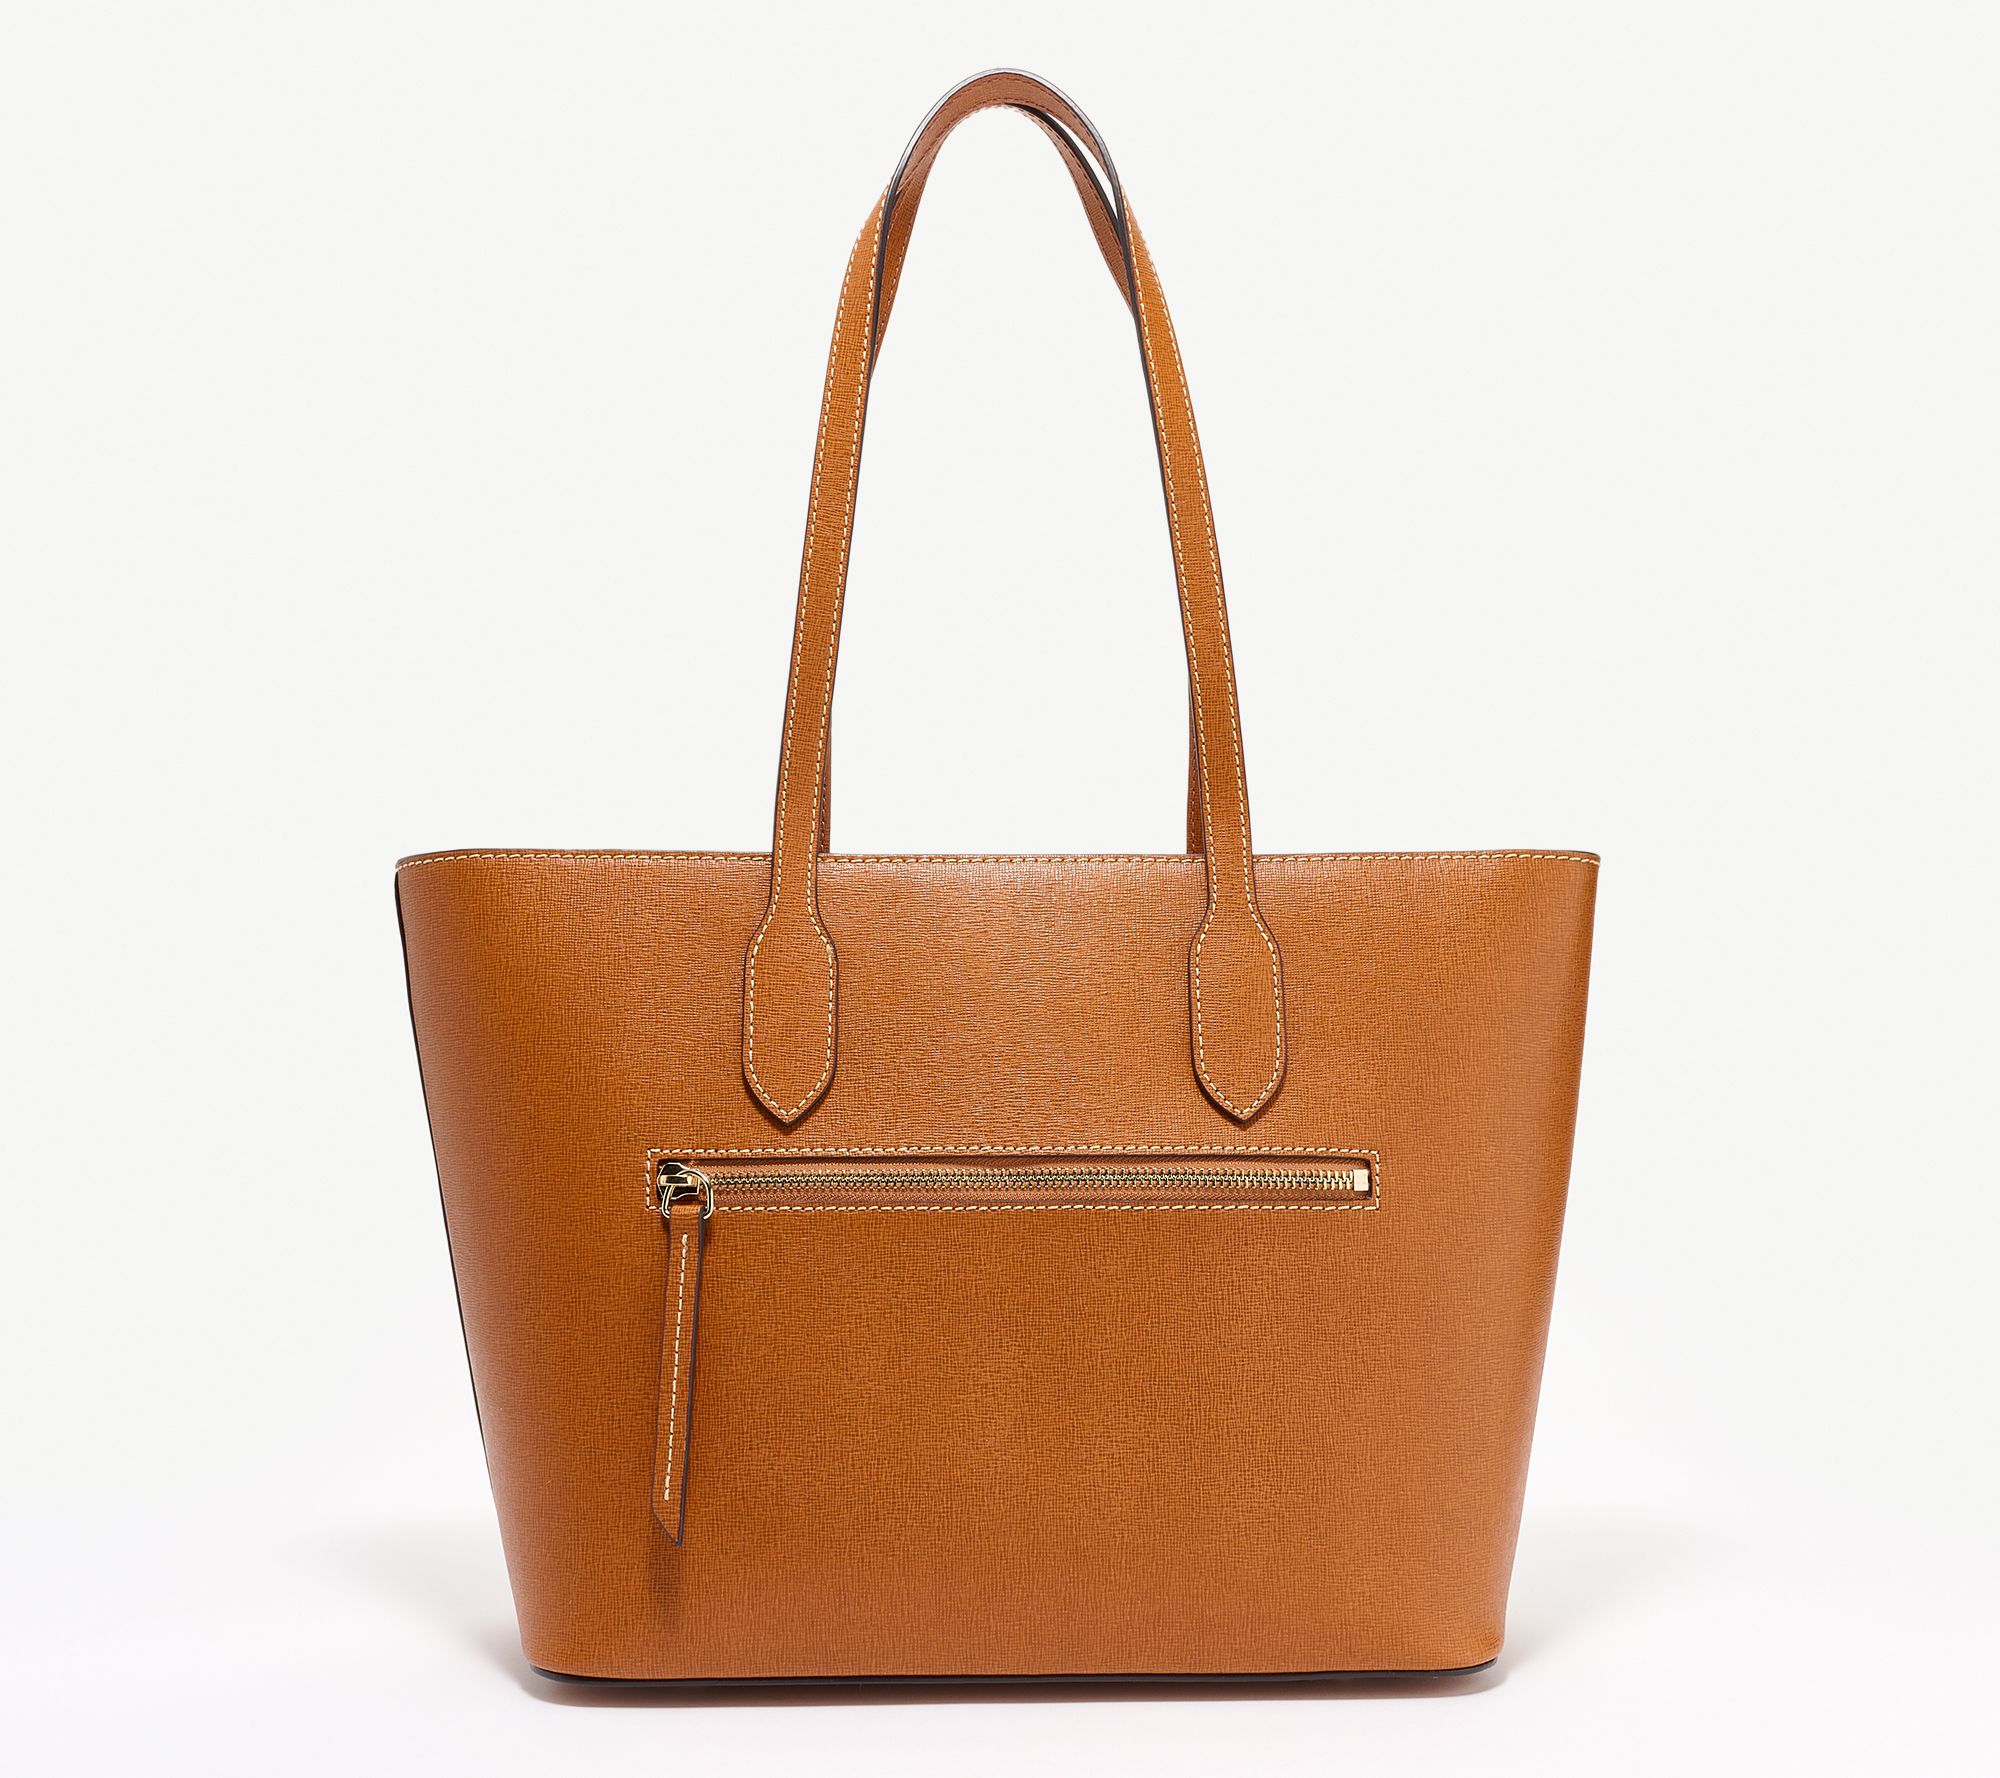 Calfskin Leather Crossbody Bag Saffiano Leather Structured 